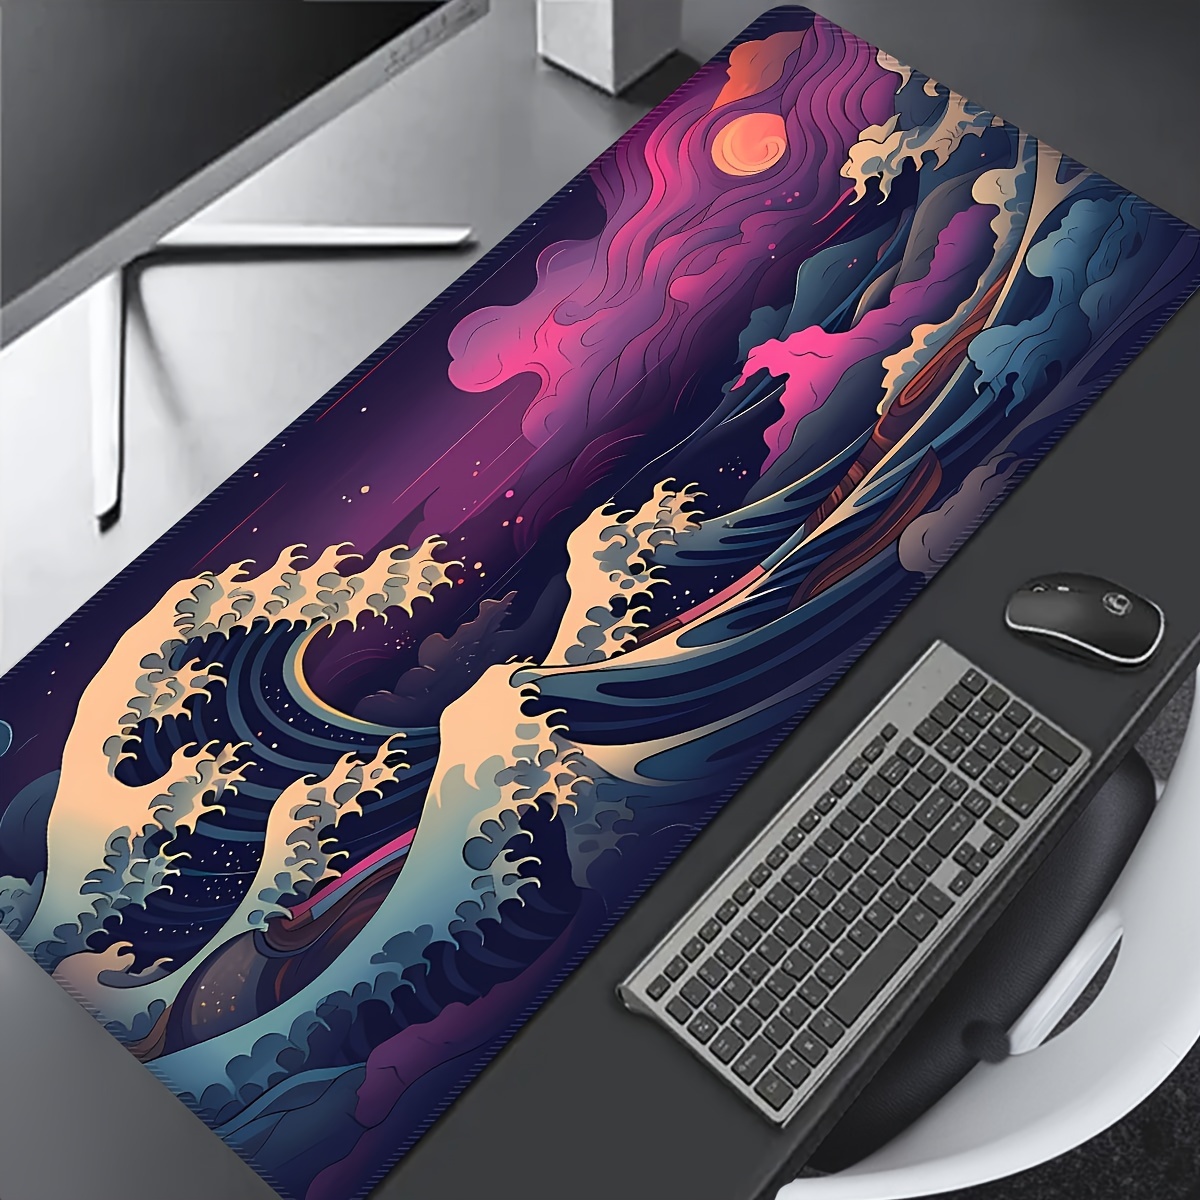 

Extra Large Washable Gaming Mouse Pad With Non-slip Rubber Base And Precision Edging - Oblong, Rectangle Shape - Durable Rubber Material - Cool Wave Design Desk Mat For Computer & Esports